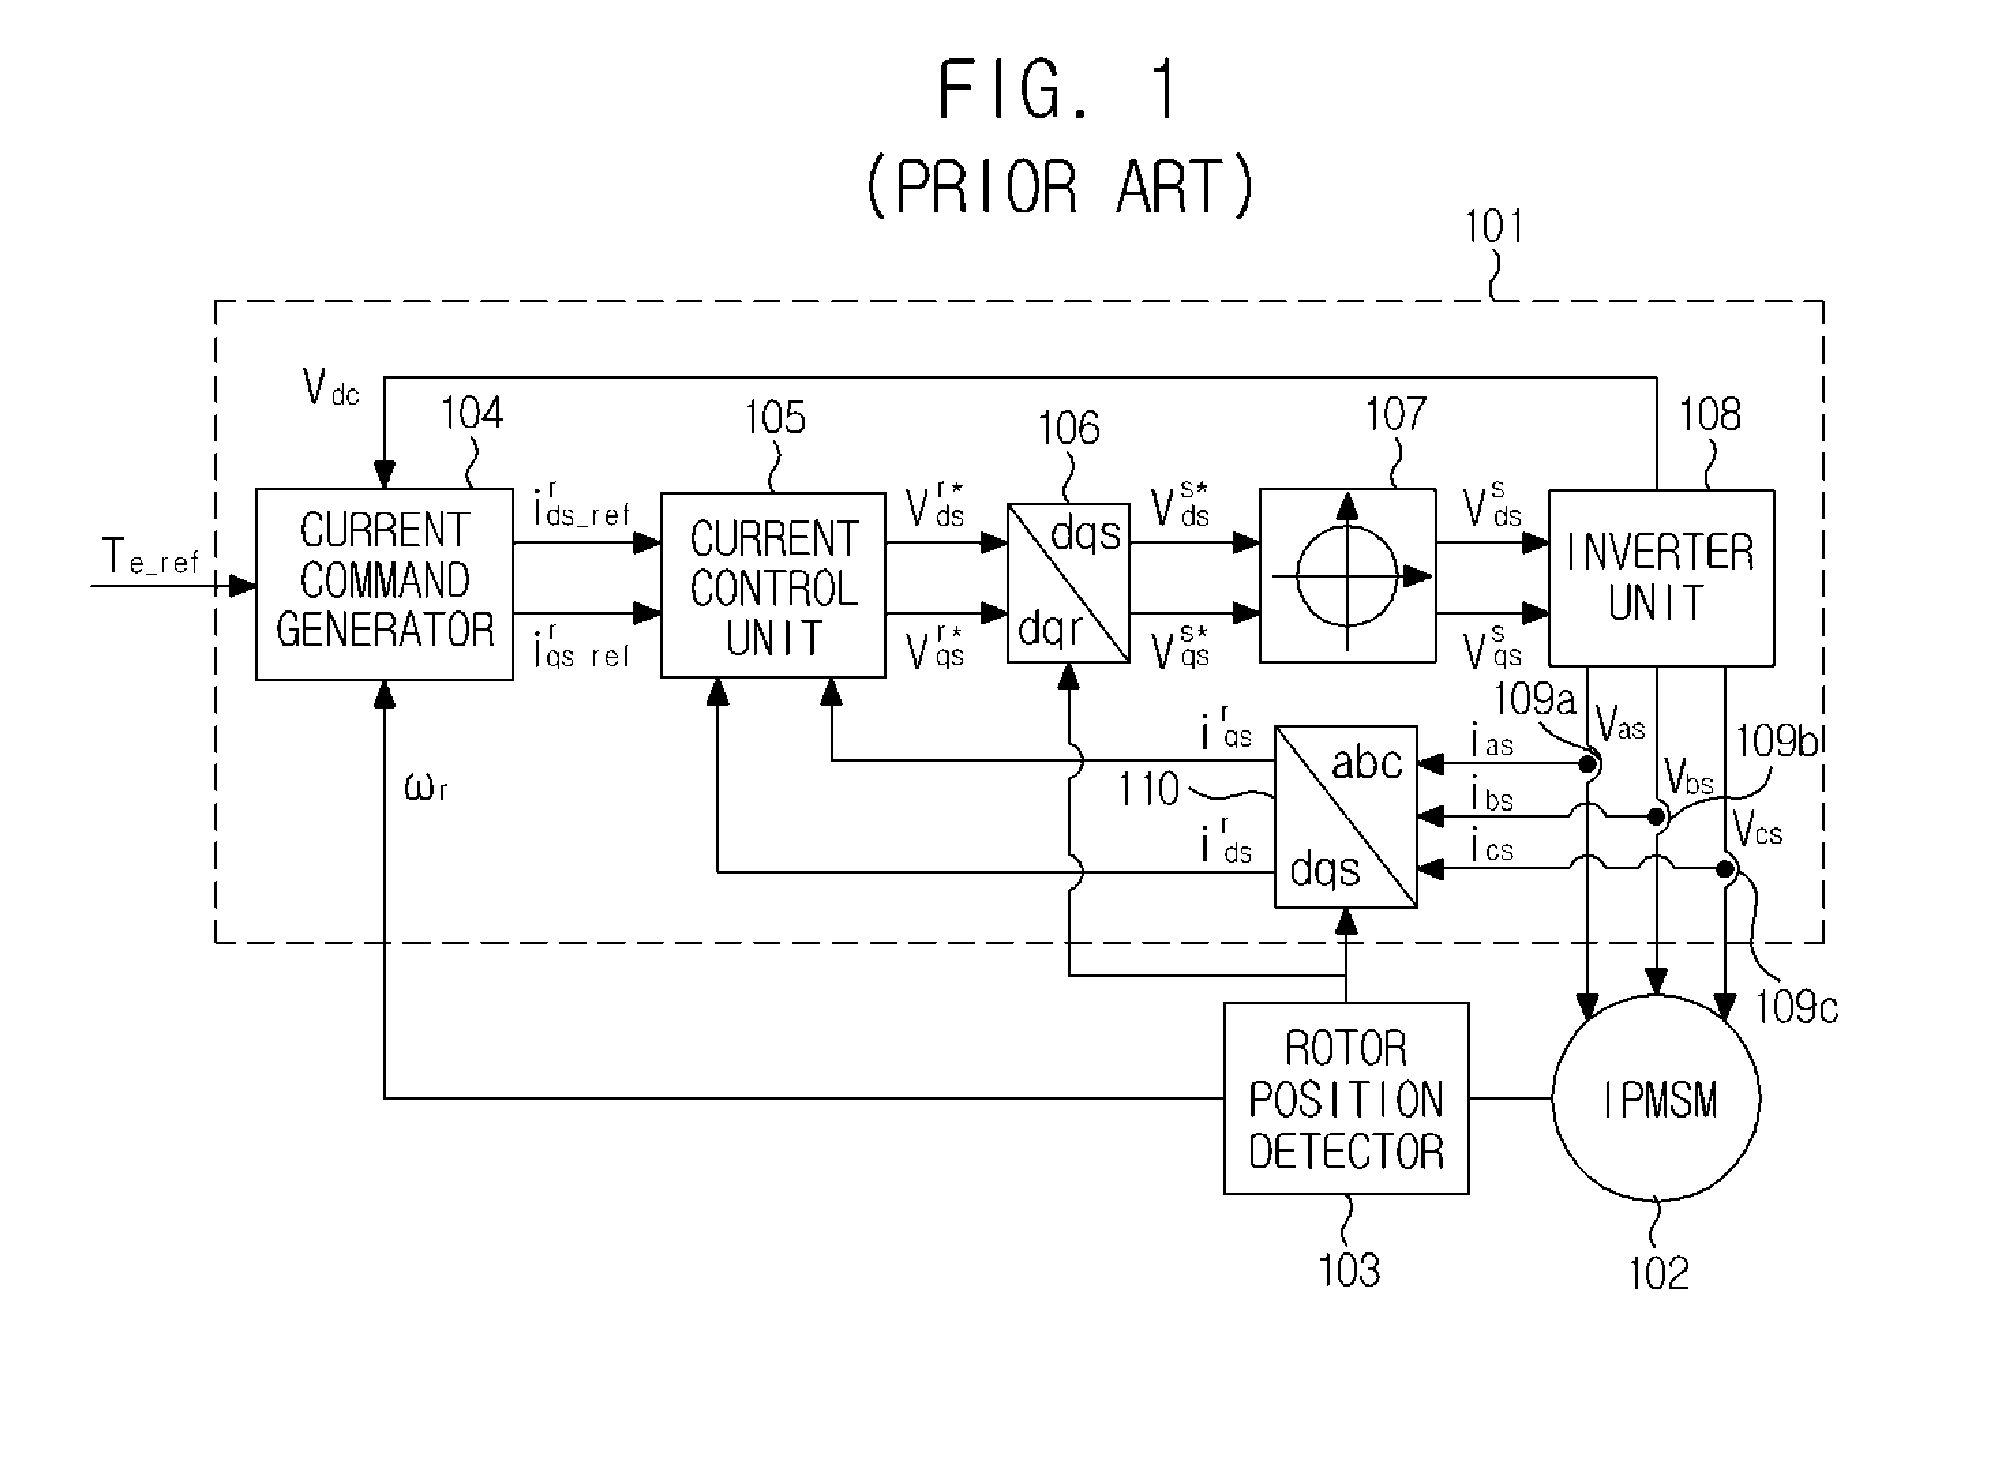 Apparatus for operating interior permanent magnet synchronous motor